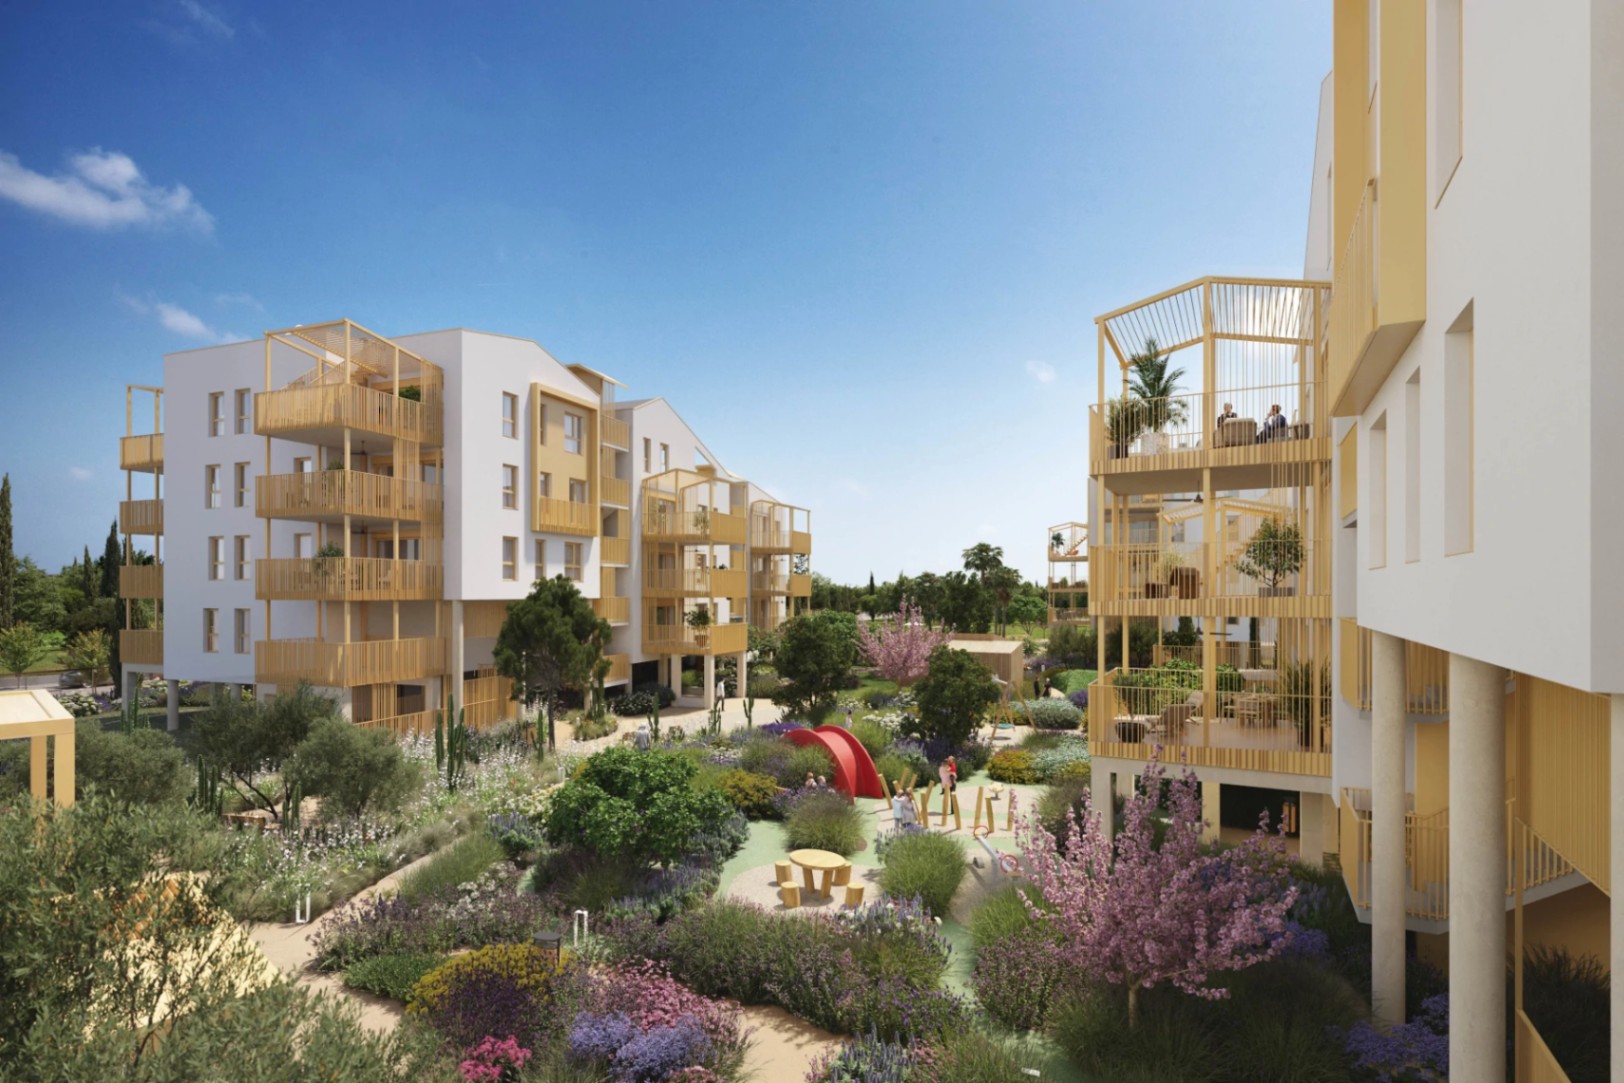 Denia: Modern new build apartment within walking distance of the beach